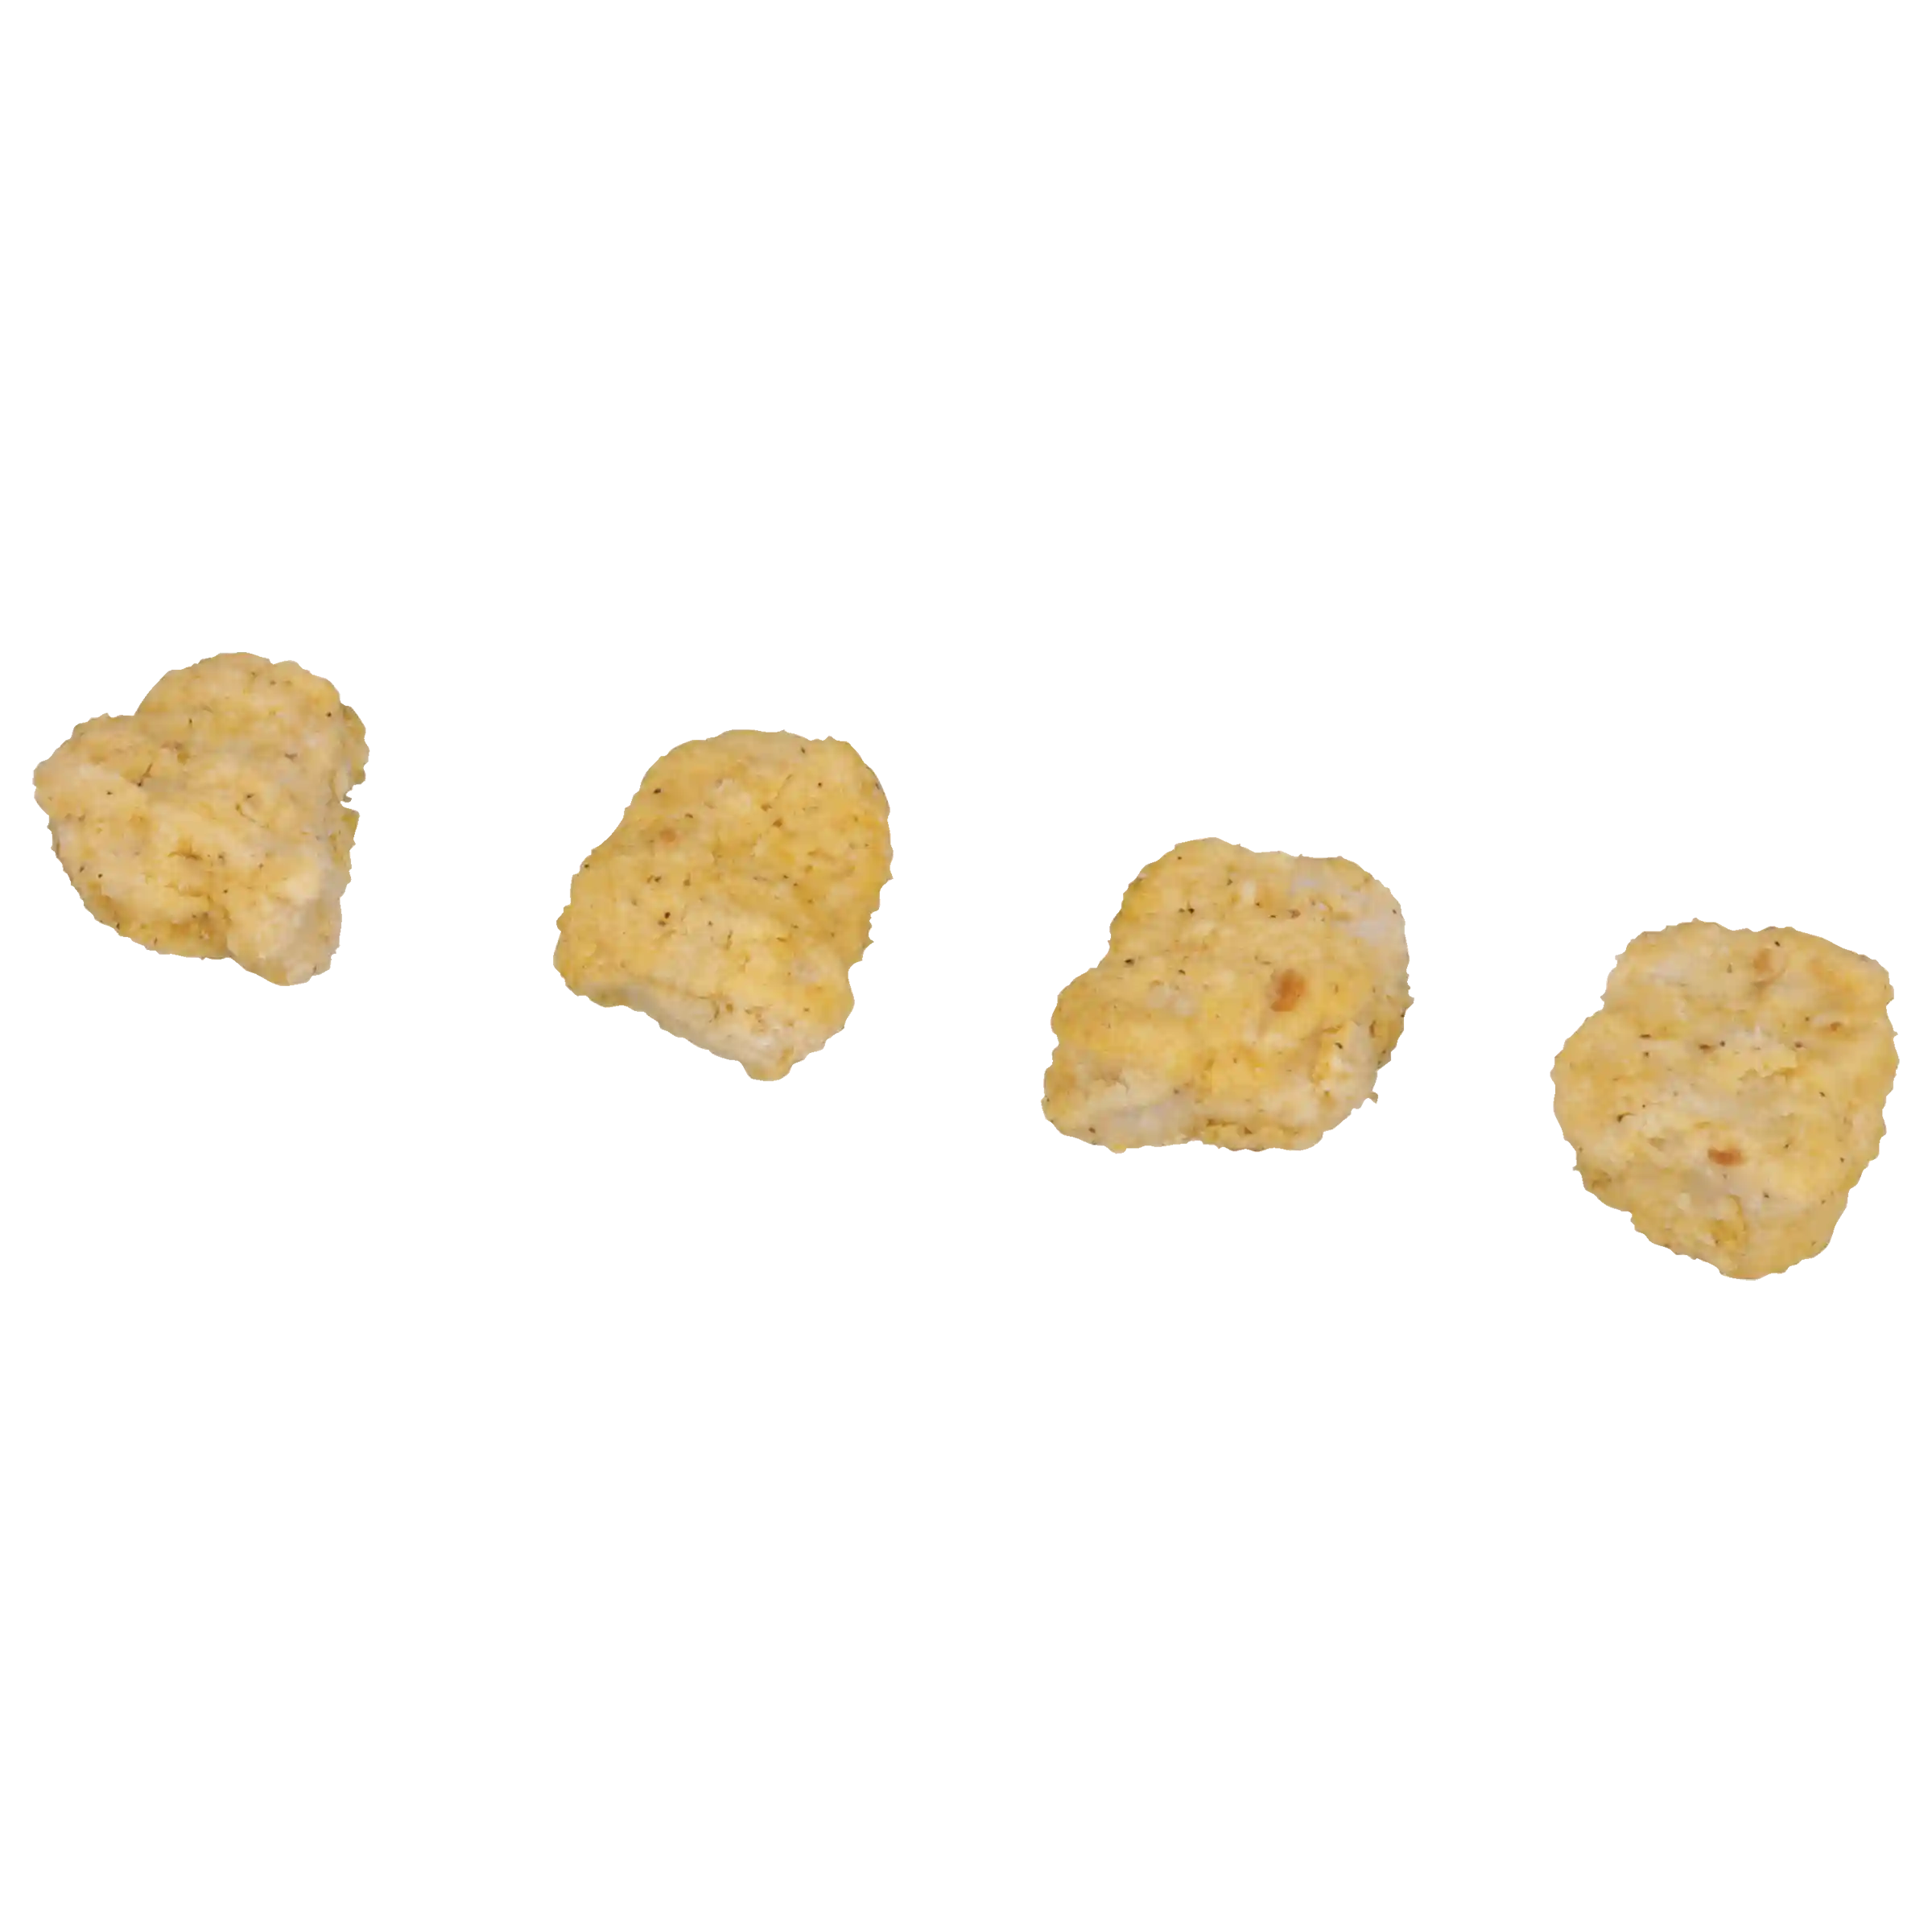 Tyson® Fully Cooked Tempura Whole Grain Battered Chicken Nuggets, CN, 0.75 oz. _image_11